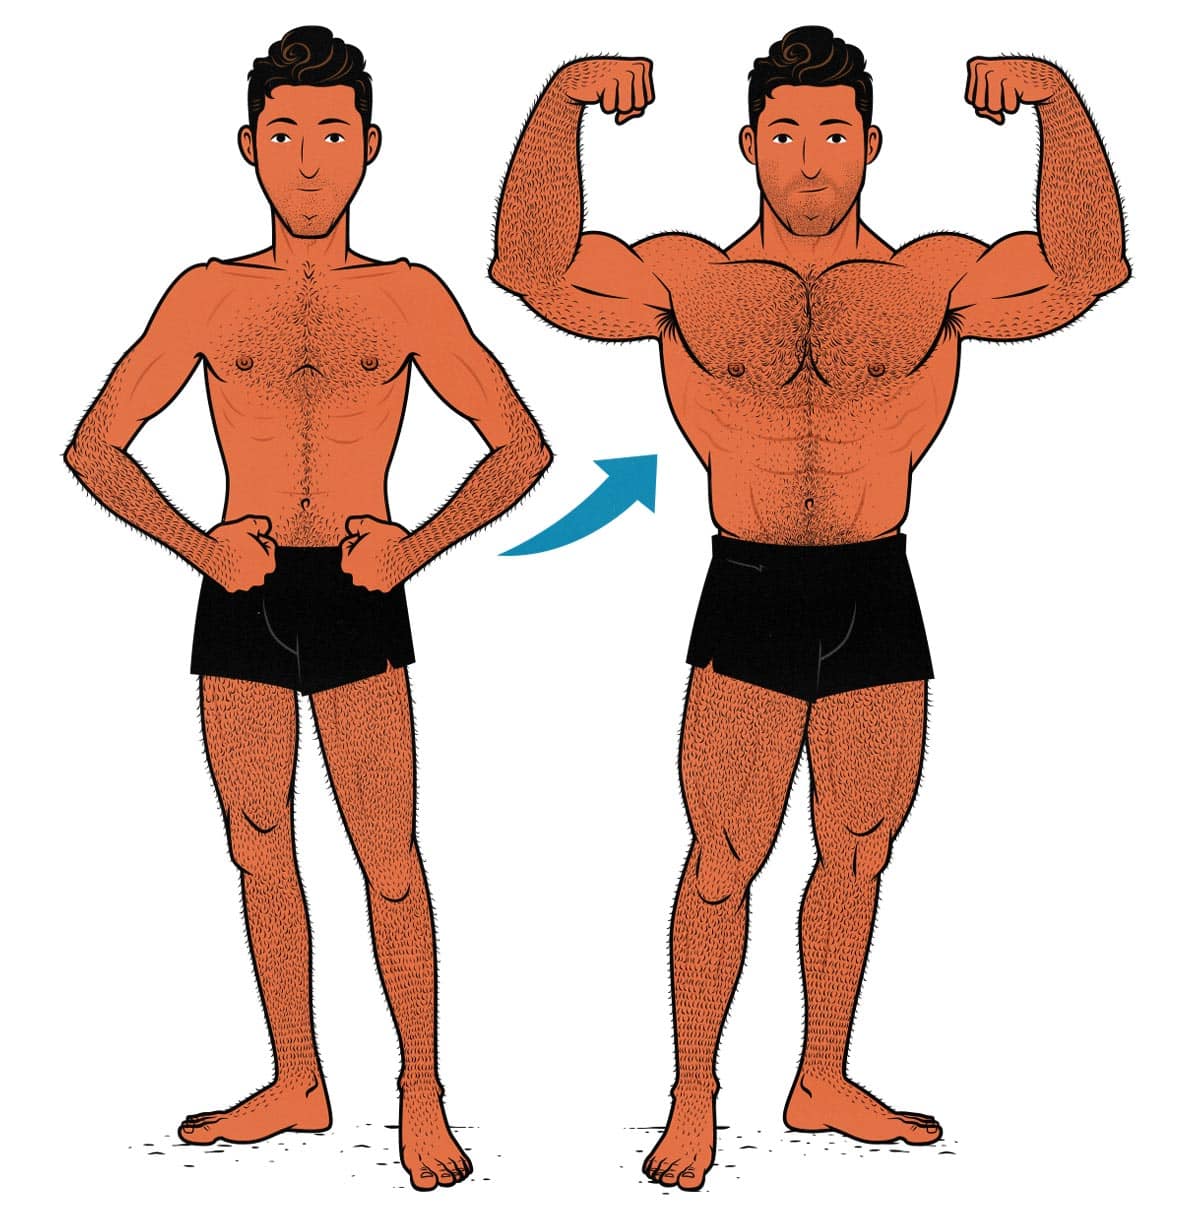 Illustration of a skinny guy building muscle quickly, getting his newbie gains.